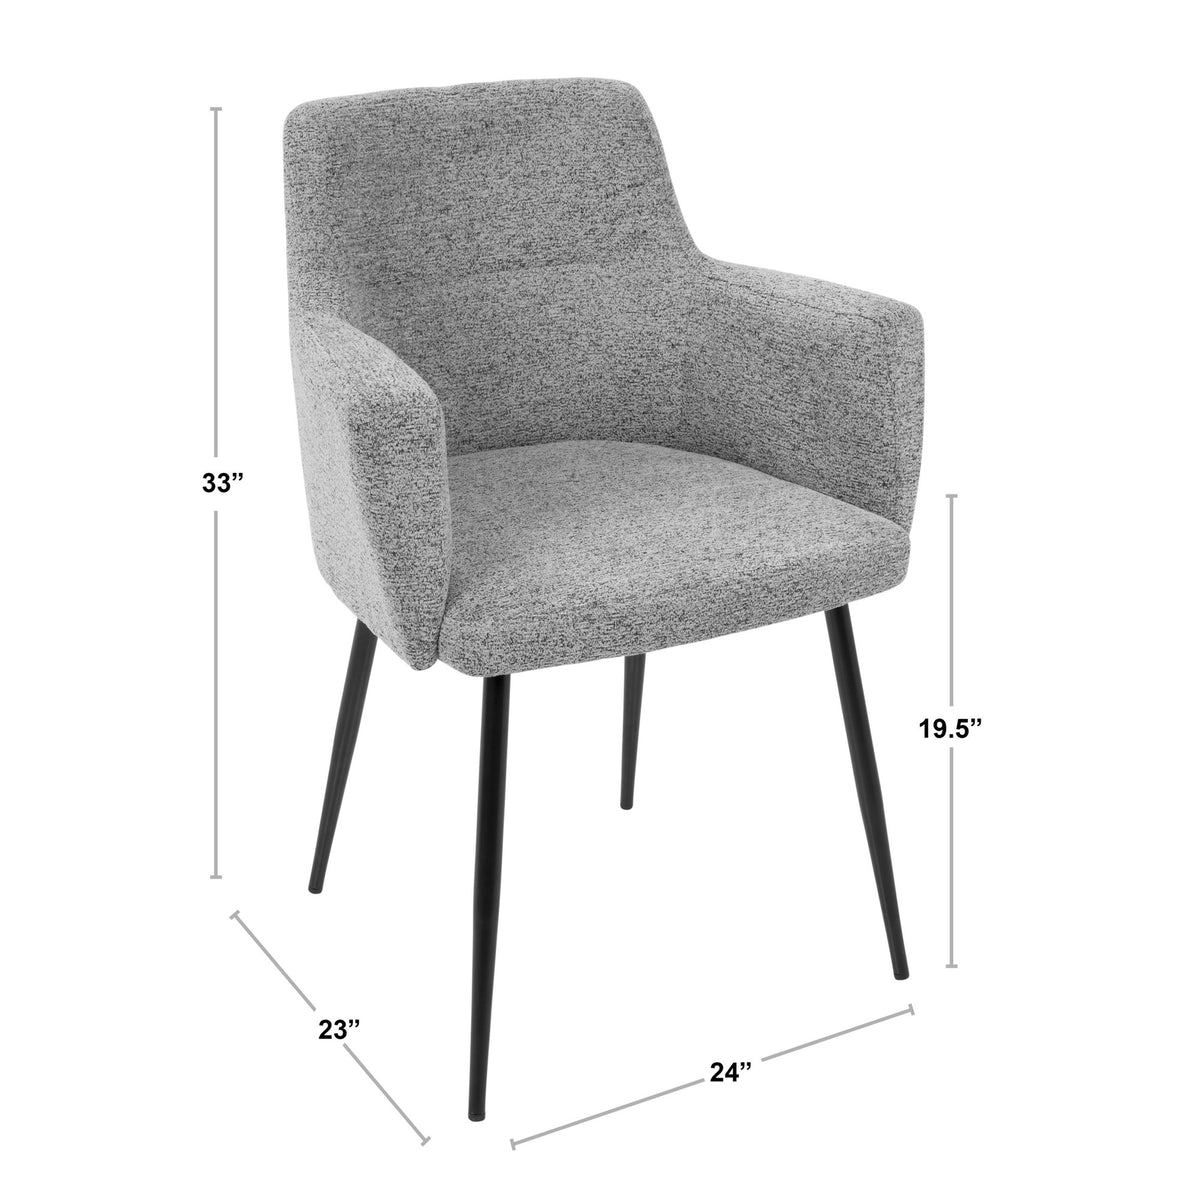 LUMISOURCE ANDREW CHAIR - SET OF 2